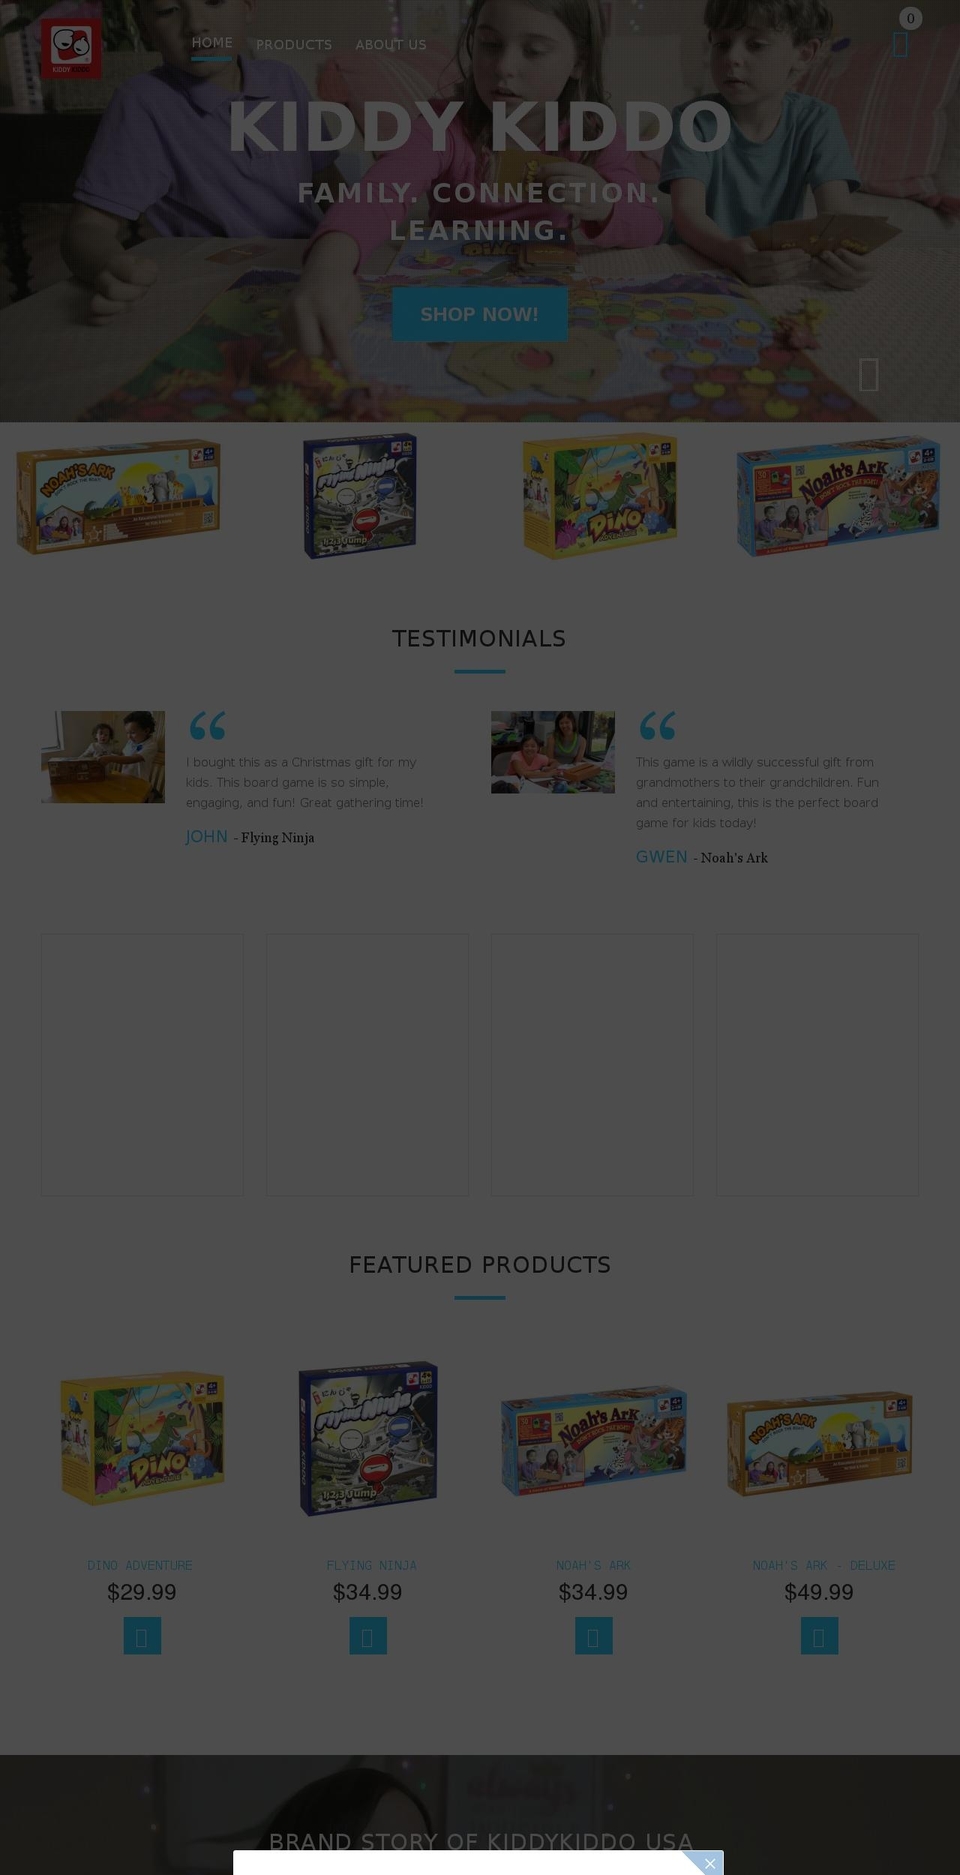 install-me-yourstore-v2-1-7 Shopify theme site example kiddykiddous.com